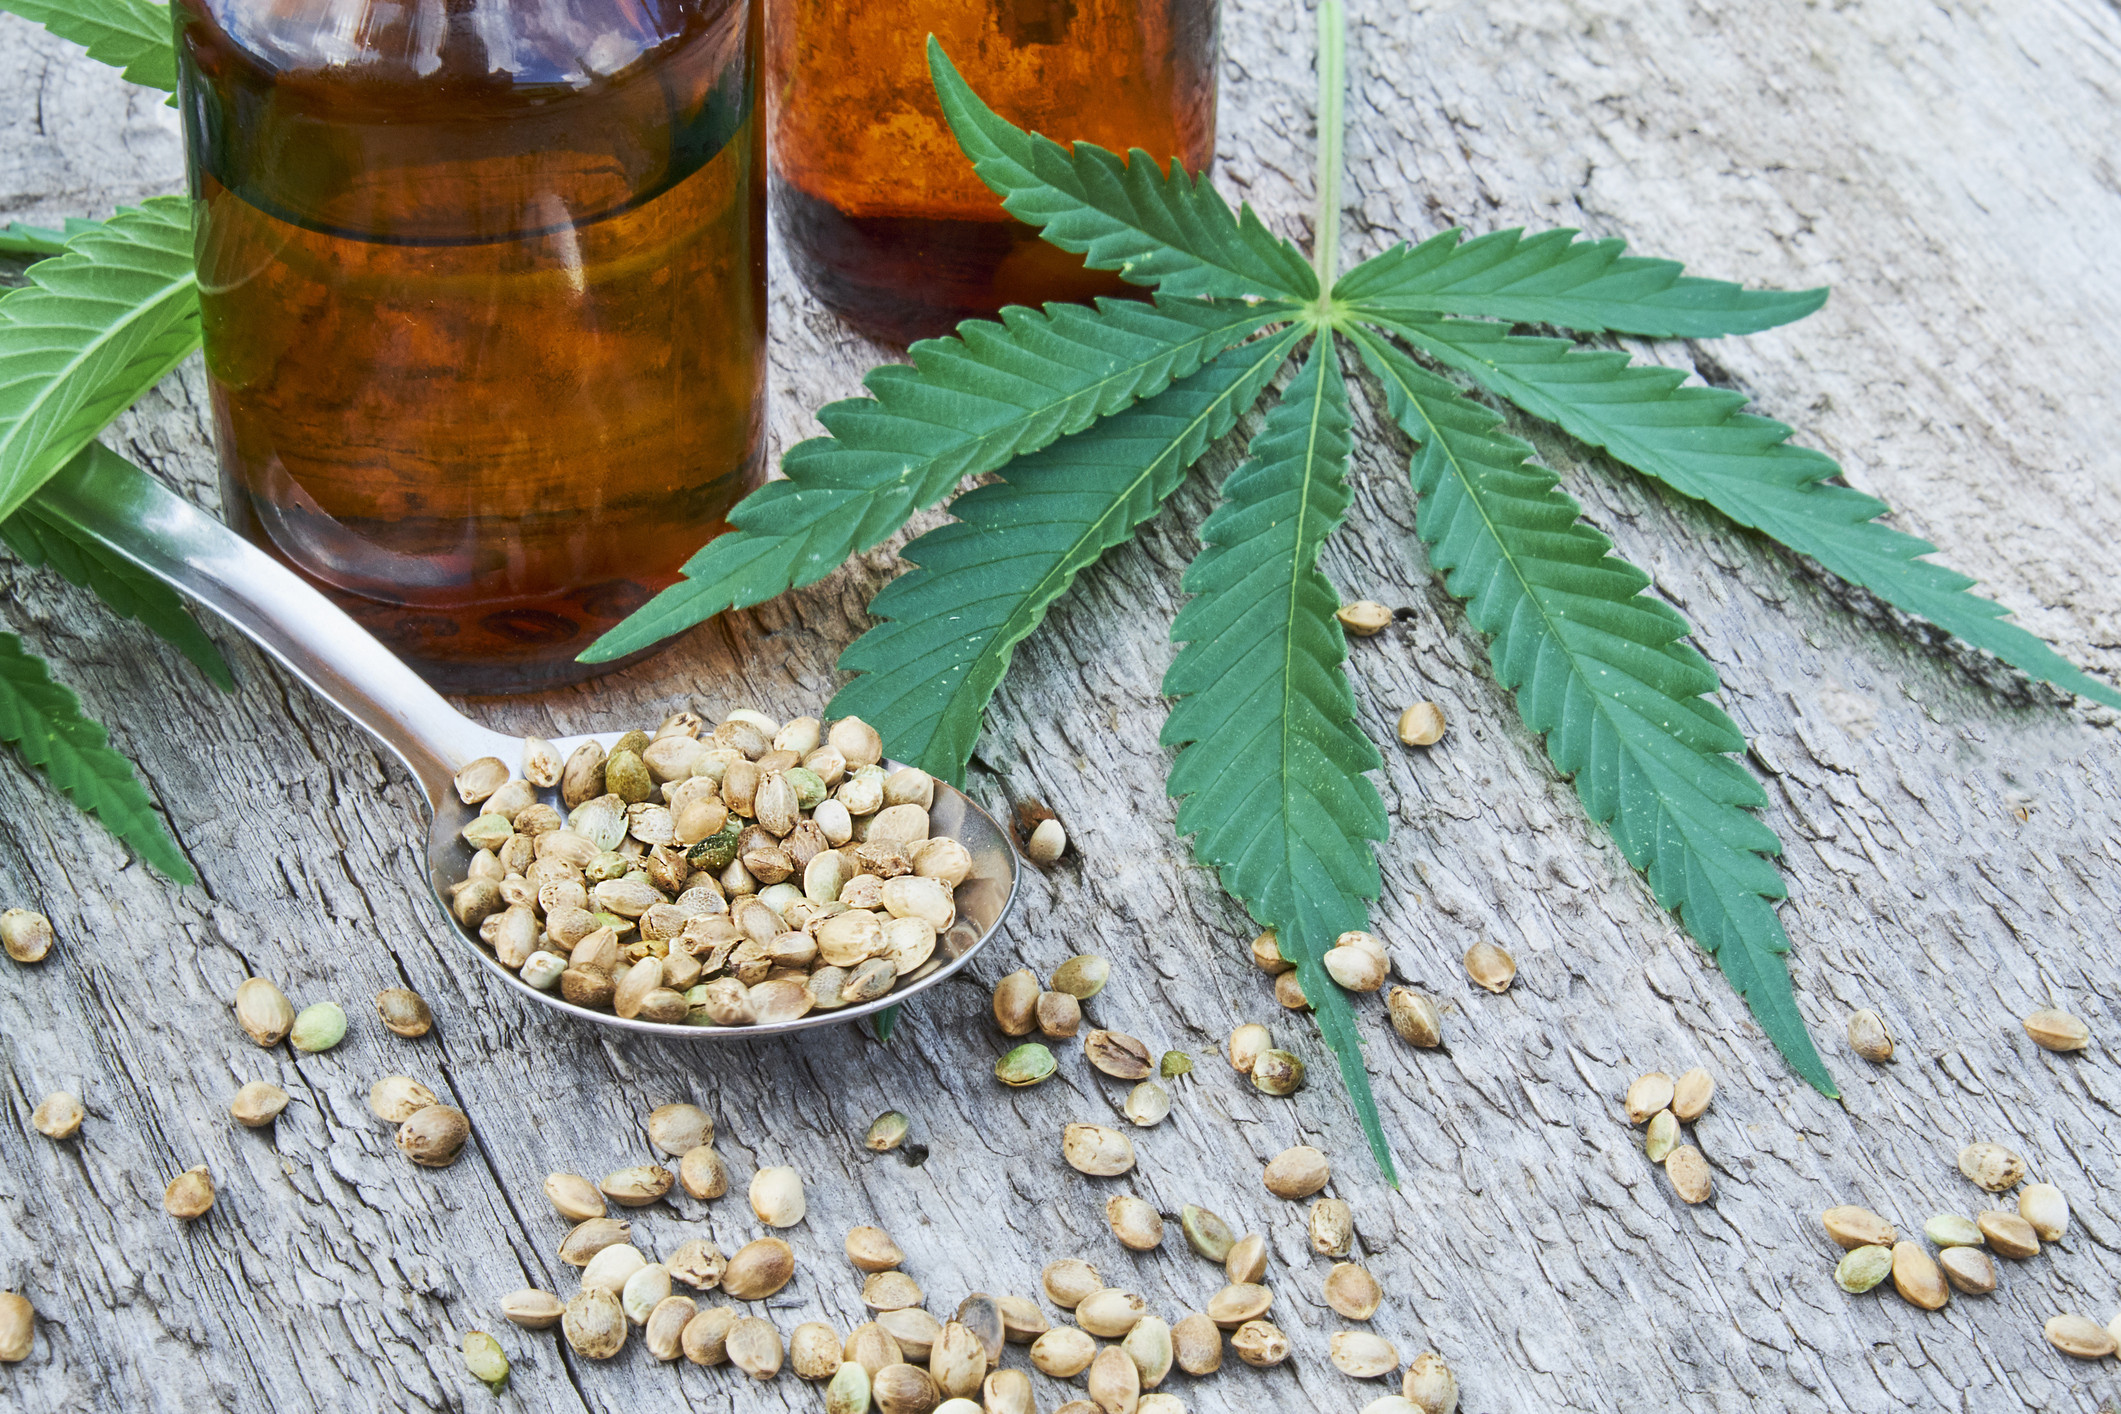 What to know about HEMP and CBD